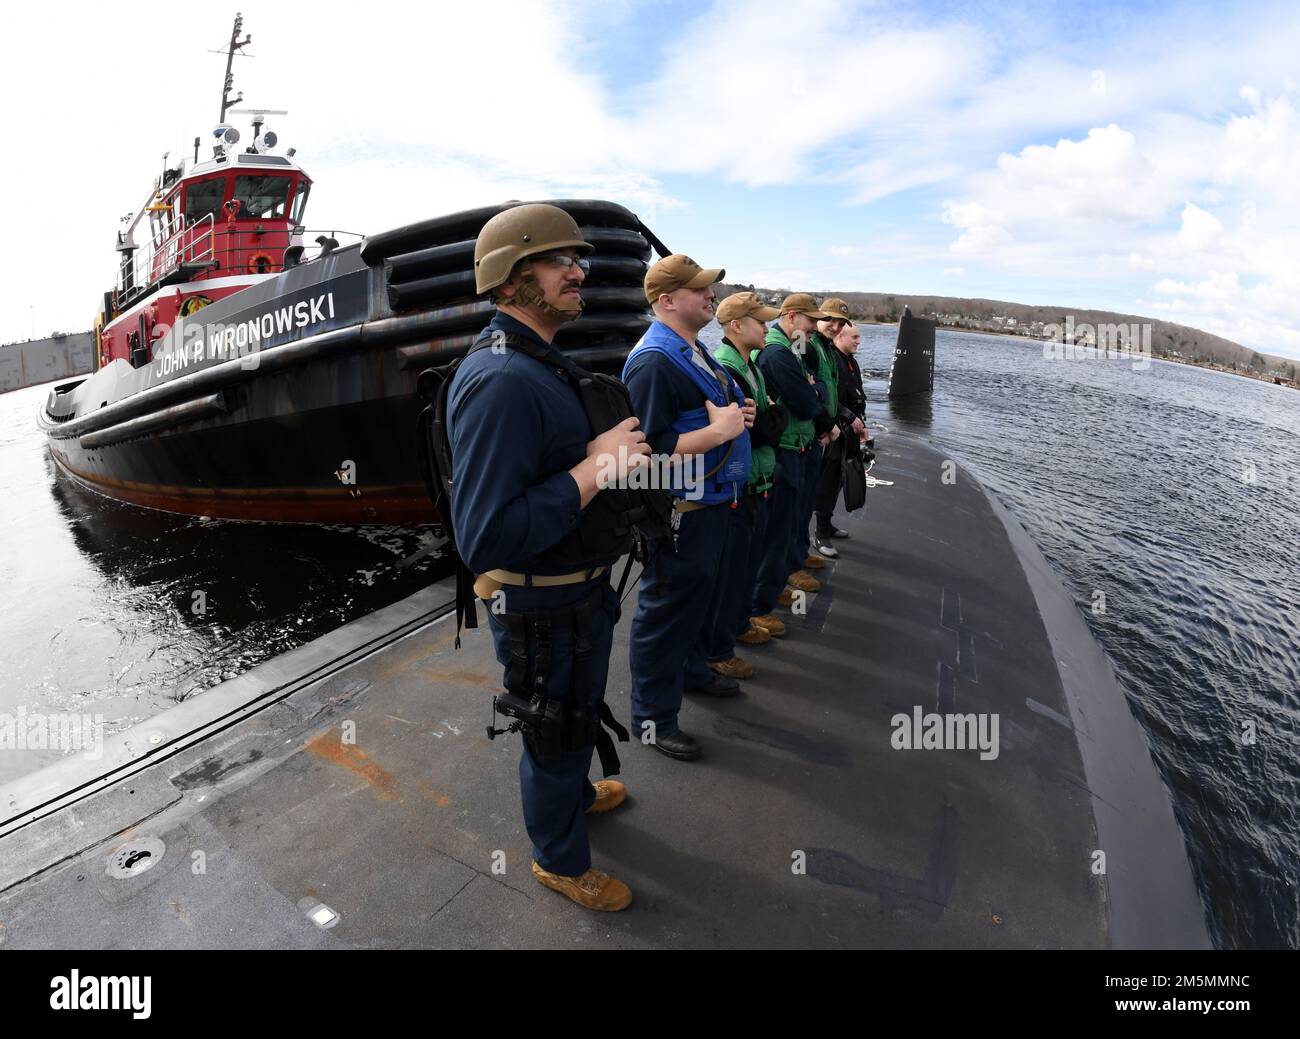 220326-N-GR655-0086 GROTON, Connecticut (March 26, 2022) – Crewmembers, attached to the Virginia-class submarine USS Delaware (SSN 791), depart the pier at Naval Submarine Base New London March 26, 2022. Delaware’s 132-man crew transited to Wilmington, Delaware to participate in week-long commemoration events in honor of the boat’s commissioning ceremony that took place administratively in April 2020 due to COVID restrictions at the time. Delaware, the seventh U.S Navy ship and first submarine named after the first U.S. state of Delaware, is a flexible, multi-mission platform designed to carry Stock Photo